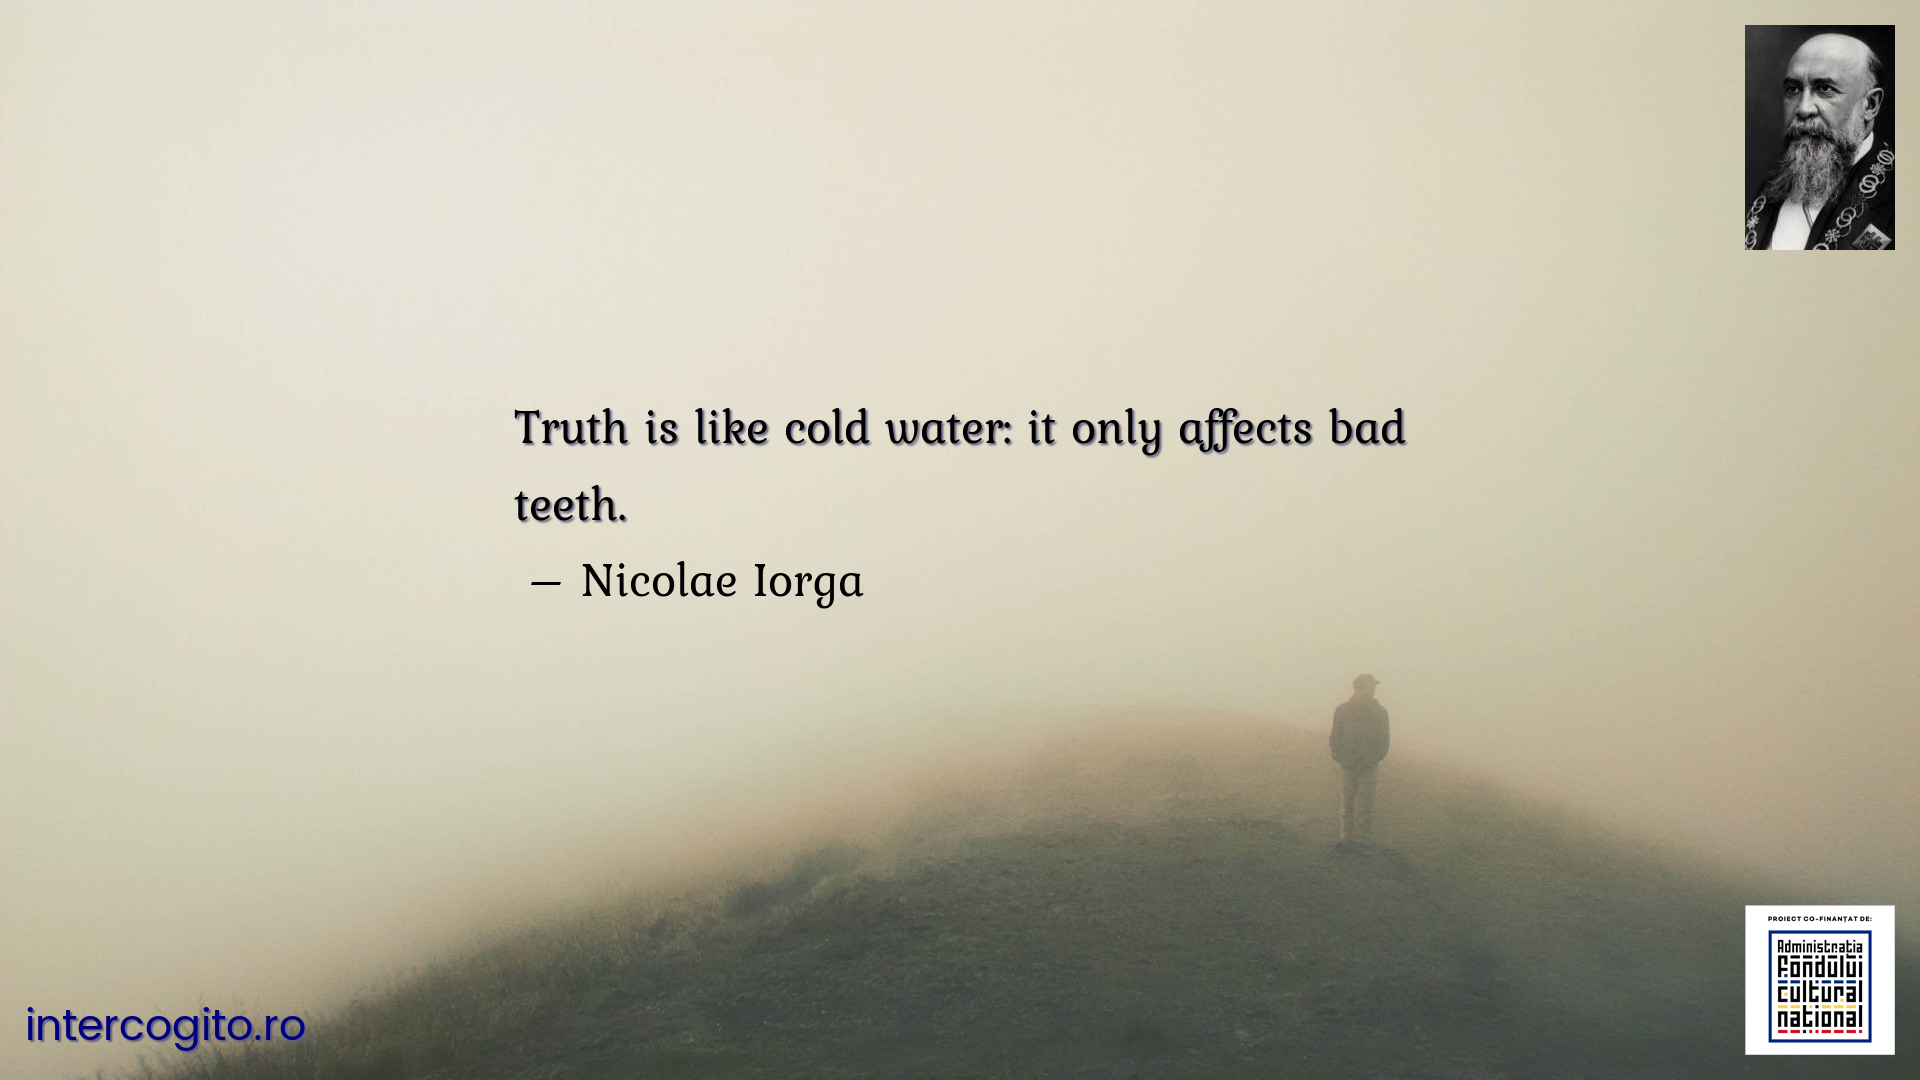 Truth is like cold water: it only affects bad teeth.